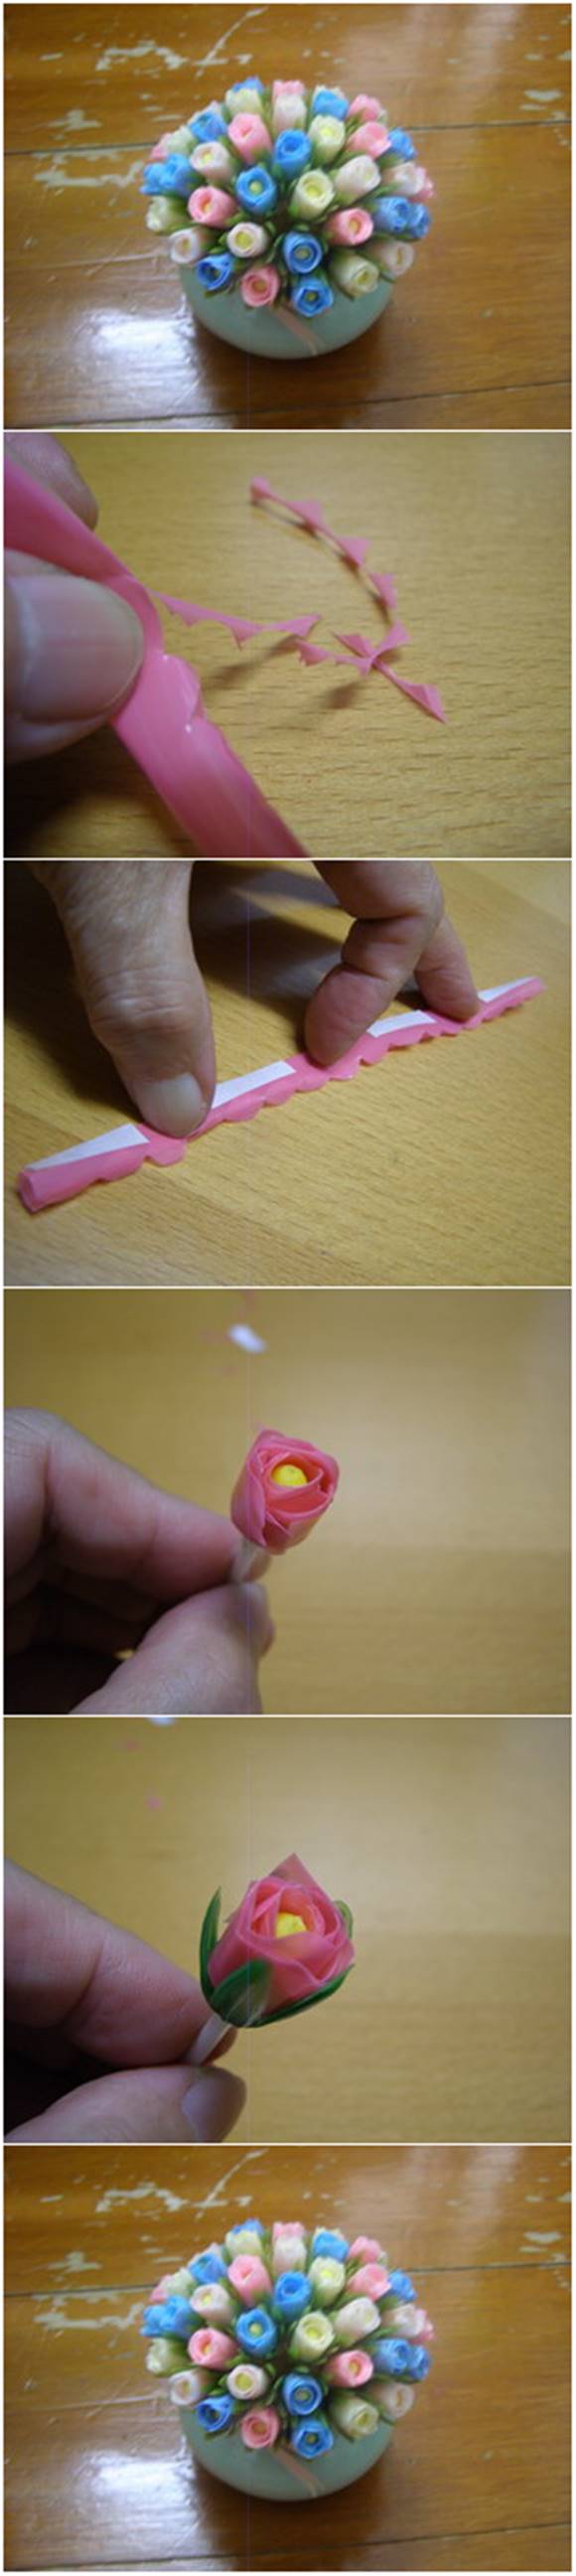 How to Make Beautiful Tulips from Drinking Straws